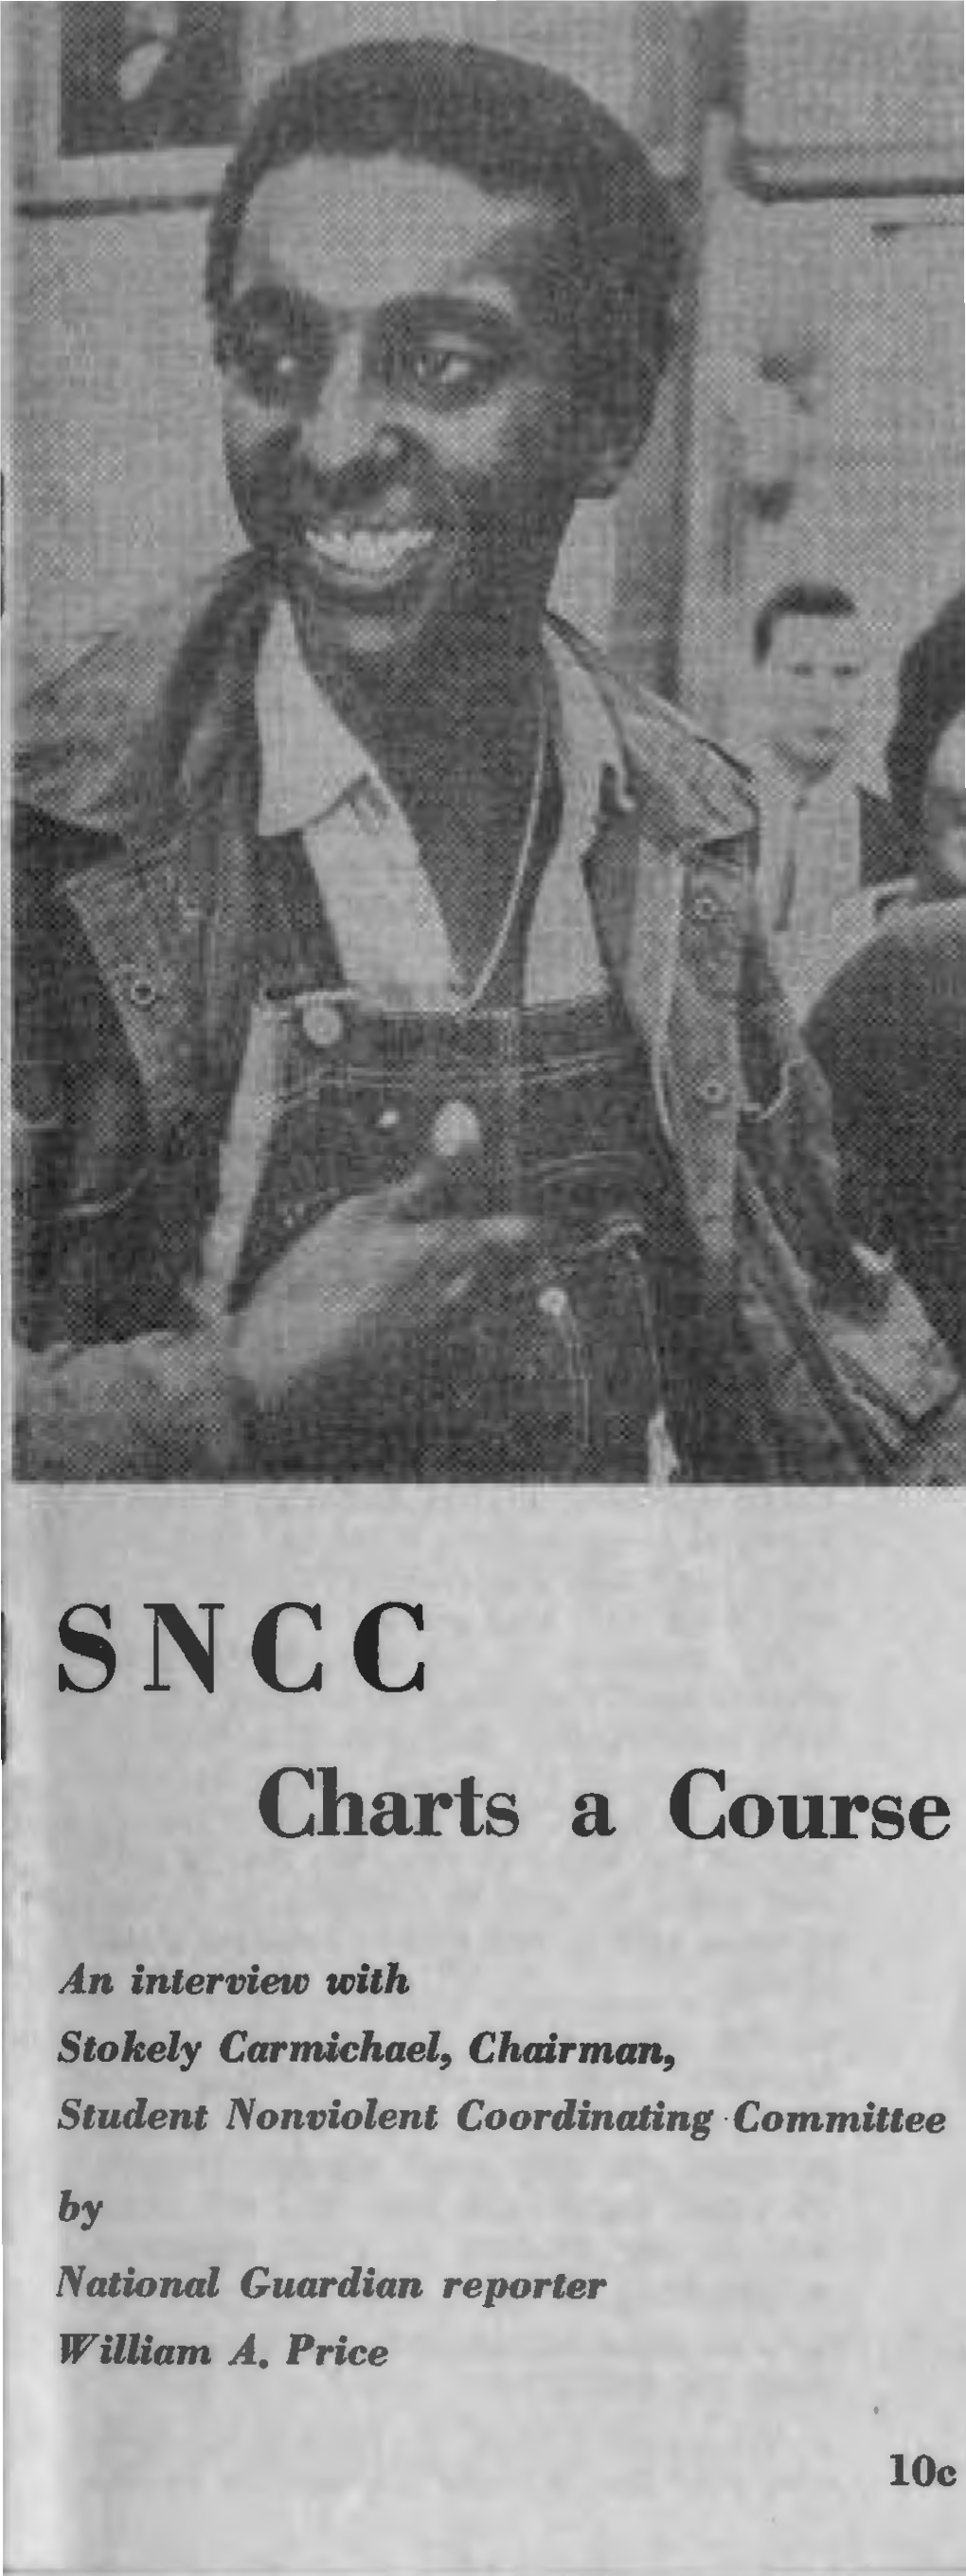 SNCC Charts a Course, National Guardian Reprint, May 1966